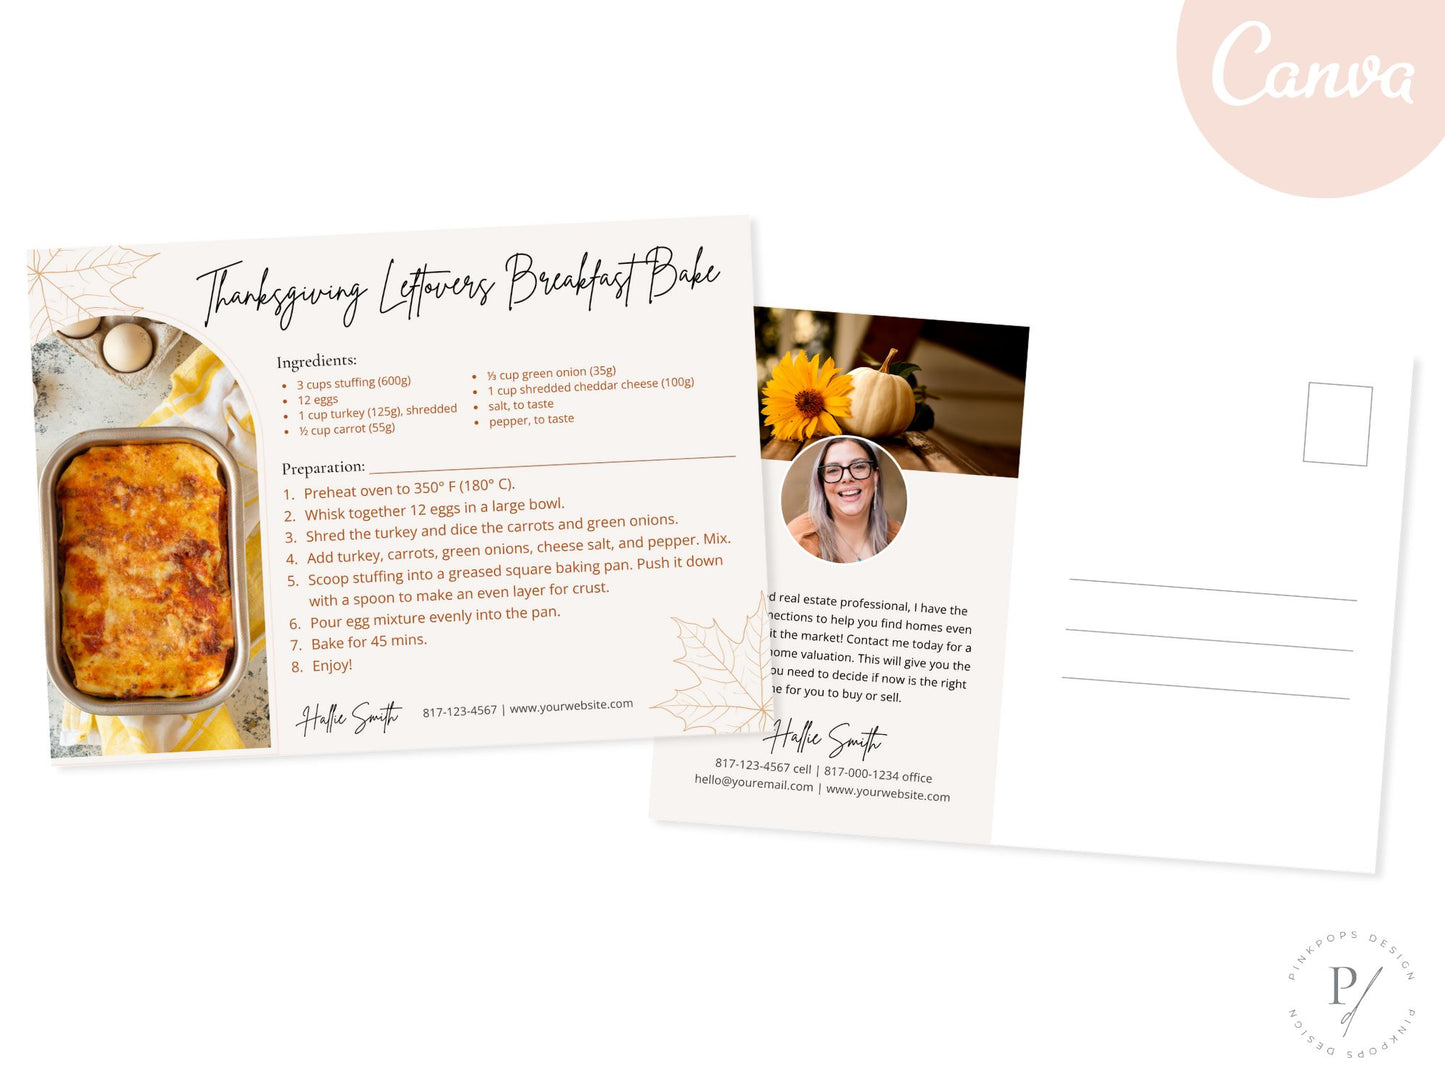 Real Estate Thanksgiving Recipe Postcard - Beautifully crafted postcard featuring a delightful Thanksgiving recipe for expressing gratitude and connecting with clients during the festive season.